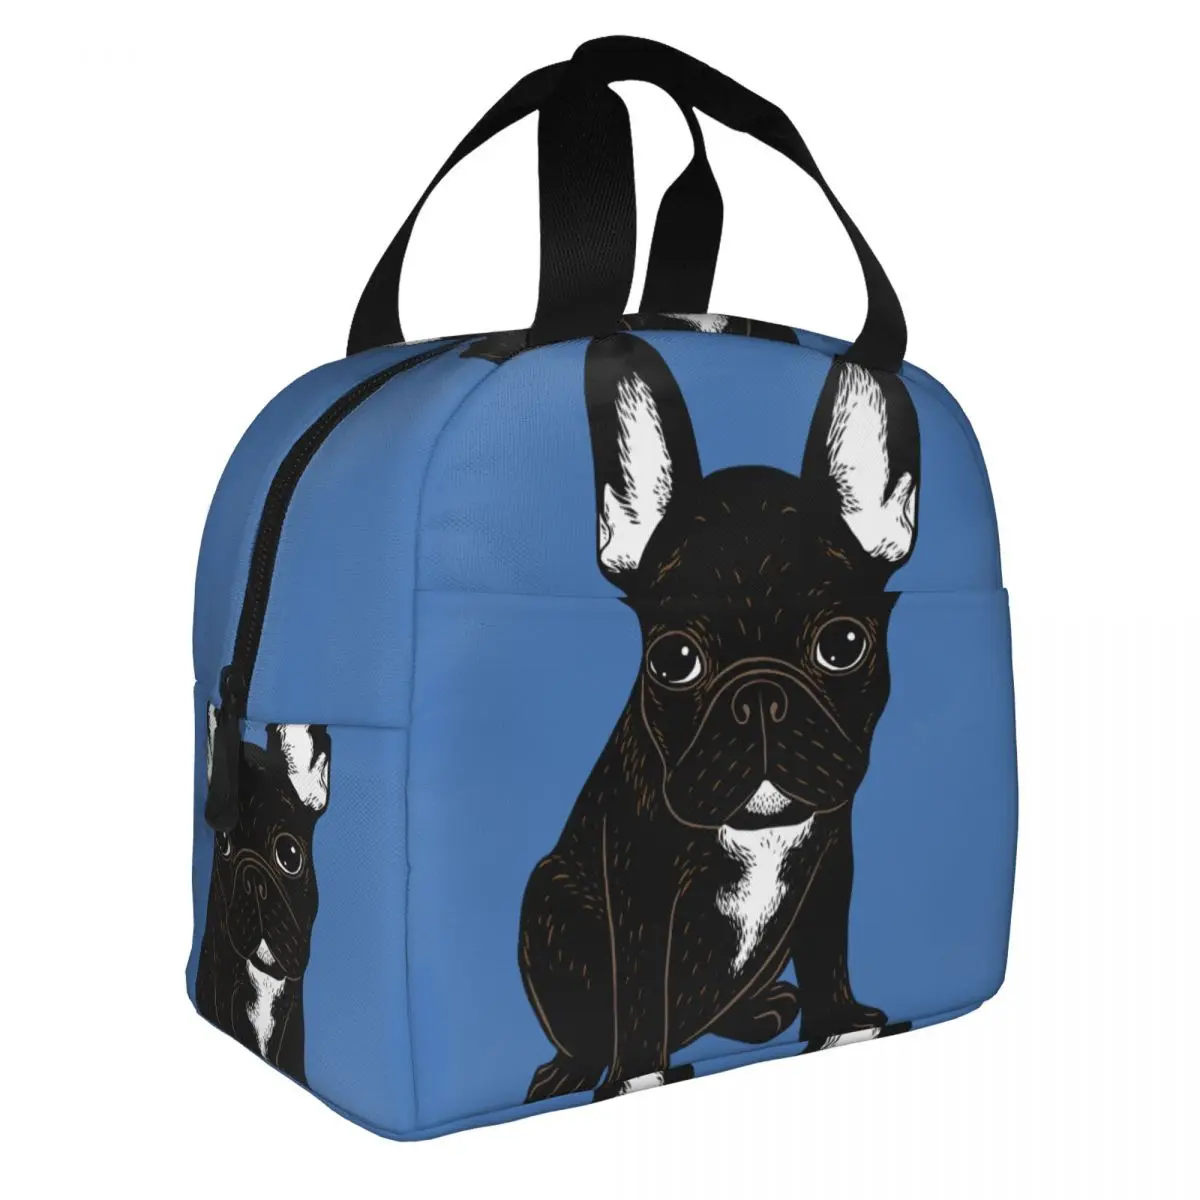 Brindle French Bulldog Lunch Bento Bags Portable Aluminum Foil thickened Thermal Cloth Lunch Bag for Women Men Boy